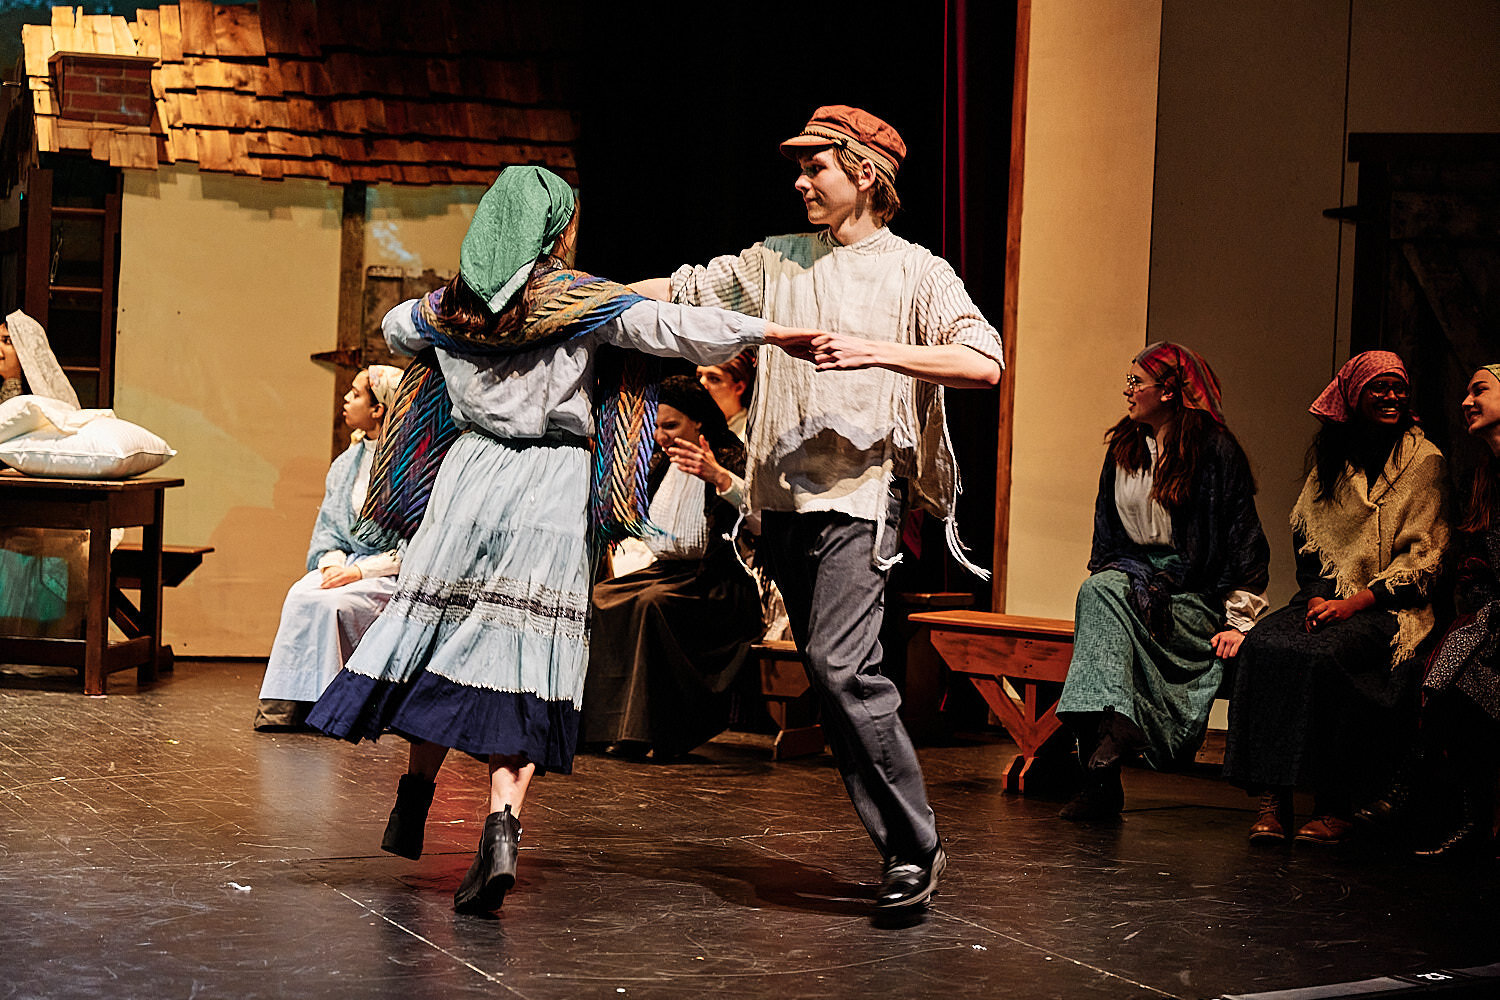  Connery Brown is performing Perchik in Sewickley Academy’s high school musical Fiddler on the Roof in February 2020. Pittsburgh, Western pennsylvania. Lots of dancing and action on stage. 